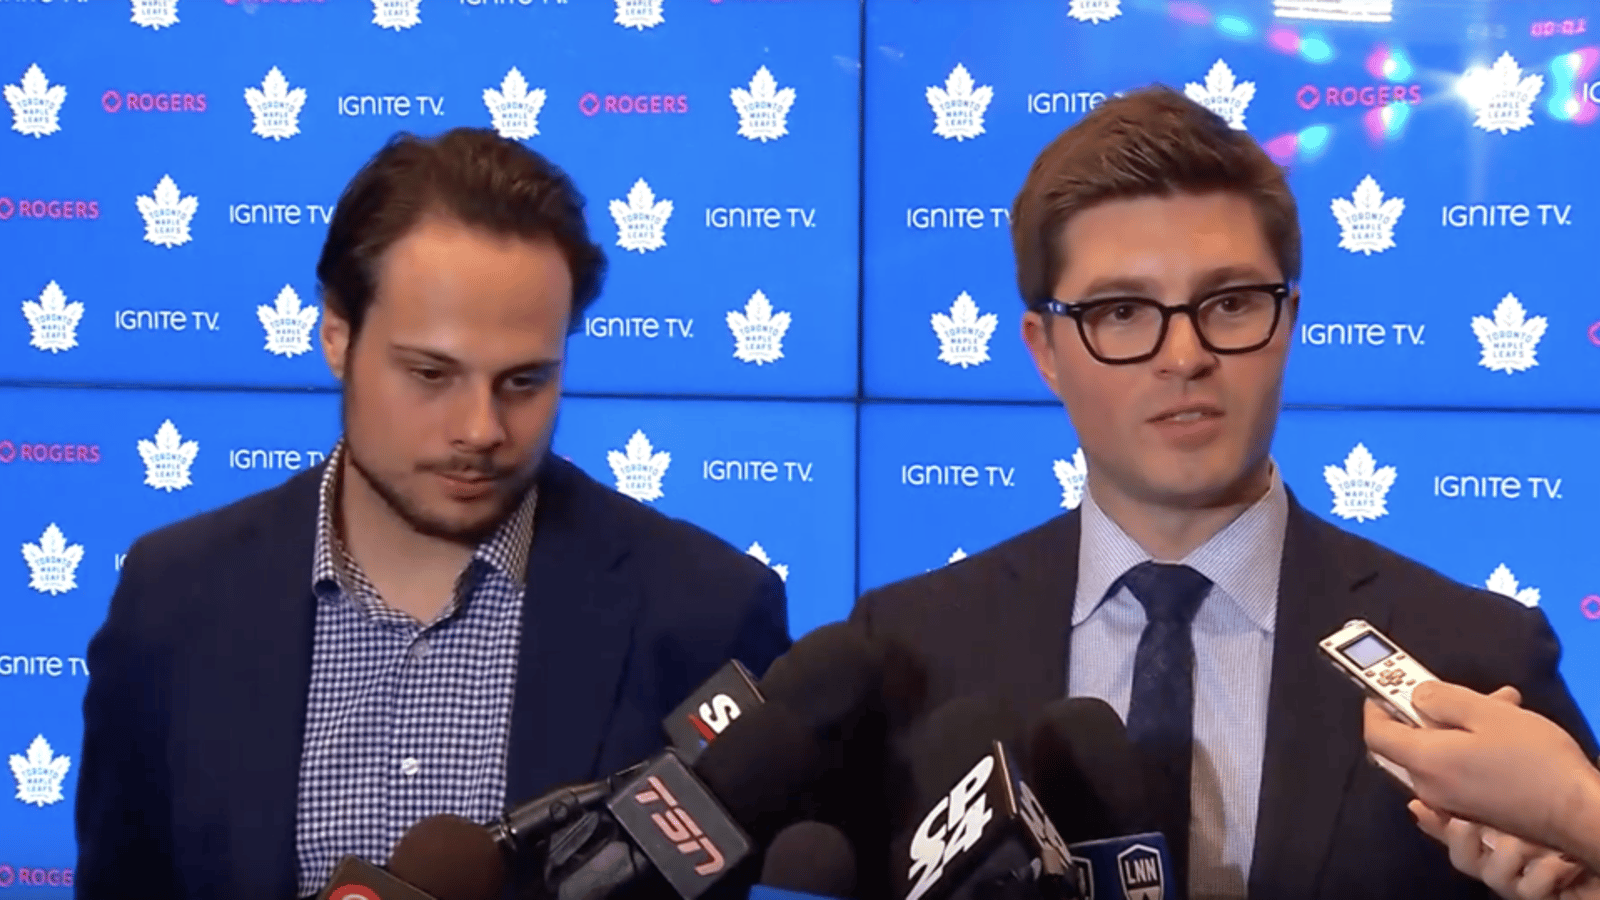 Kyle Dubas could walk away even if the Maple Leafs win a playoff round